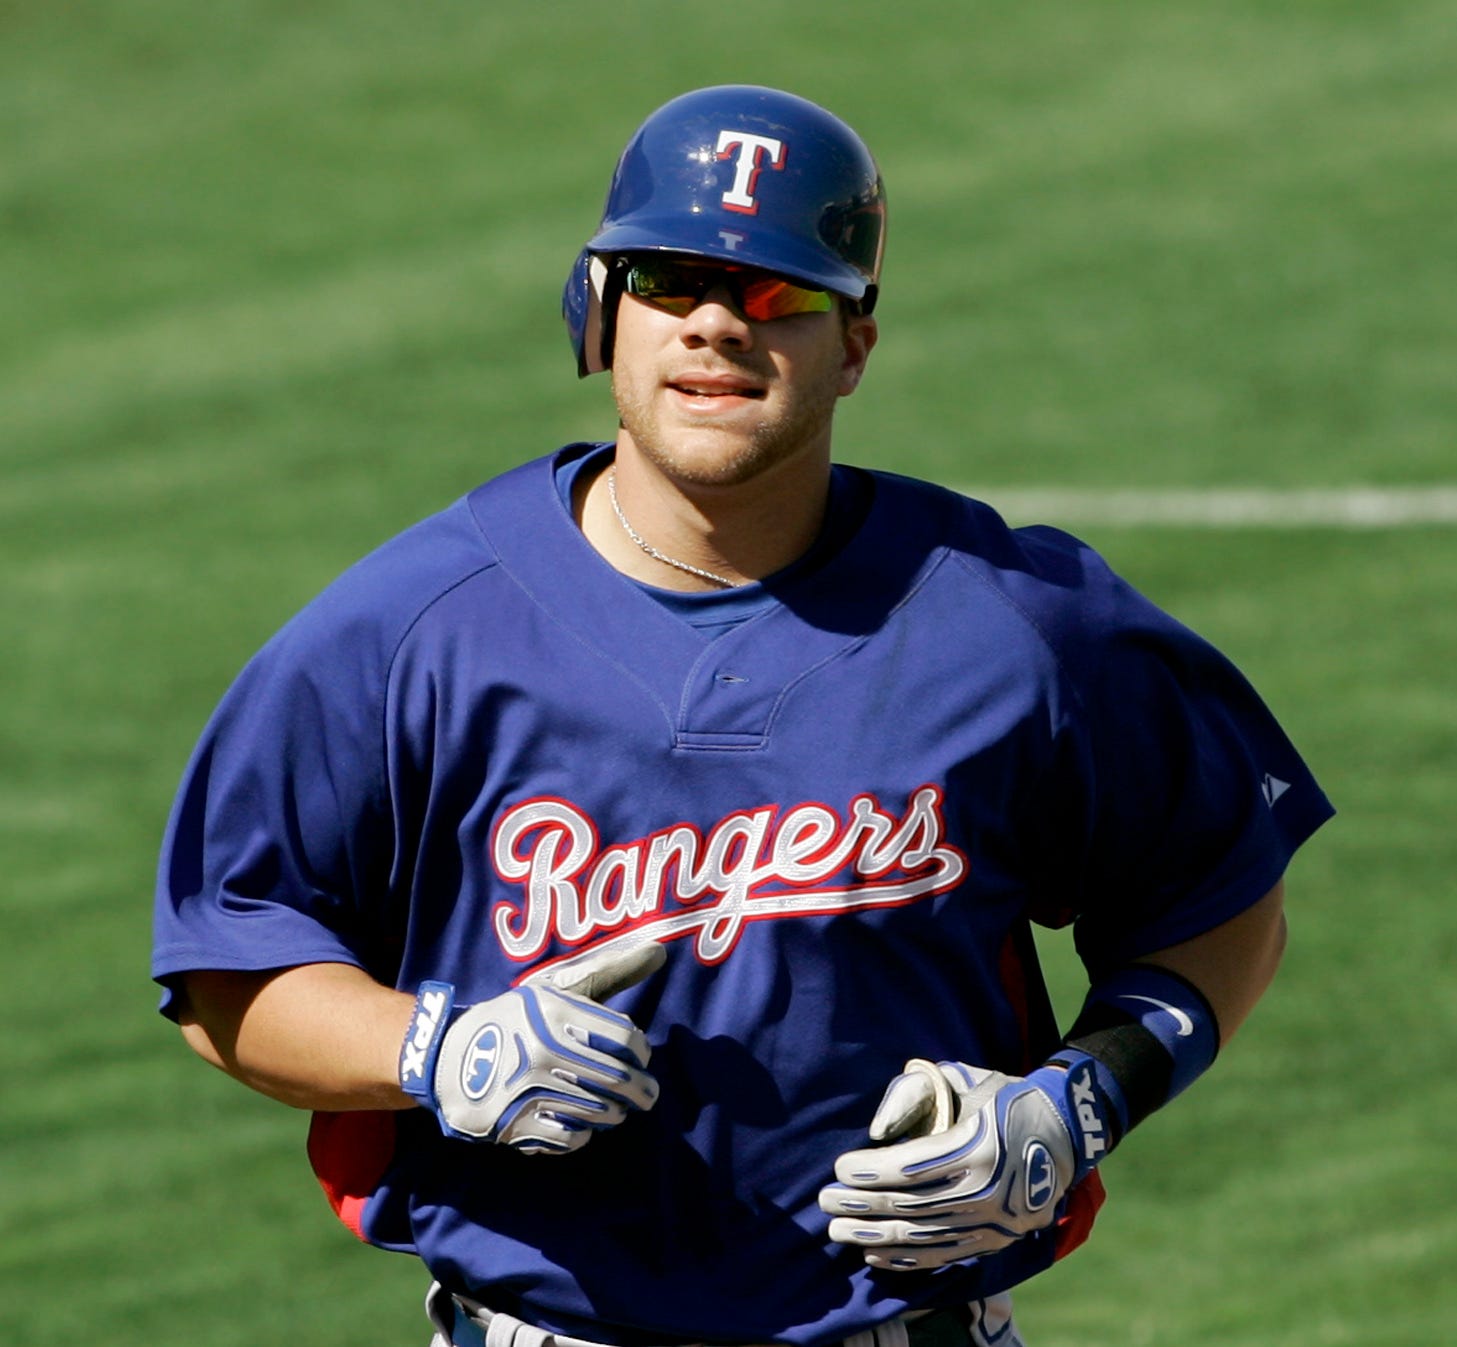 The Rangers have signed Rougned Odor's younger brother. He is also